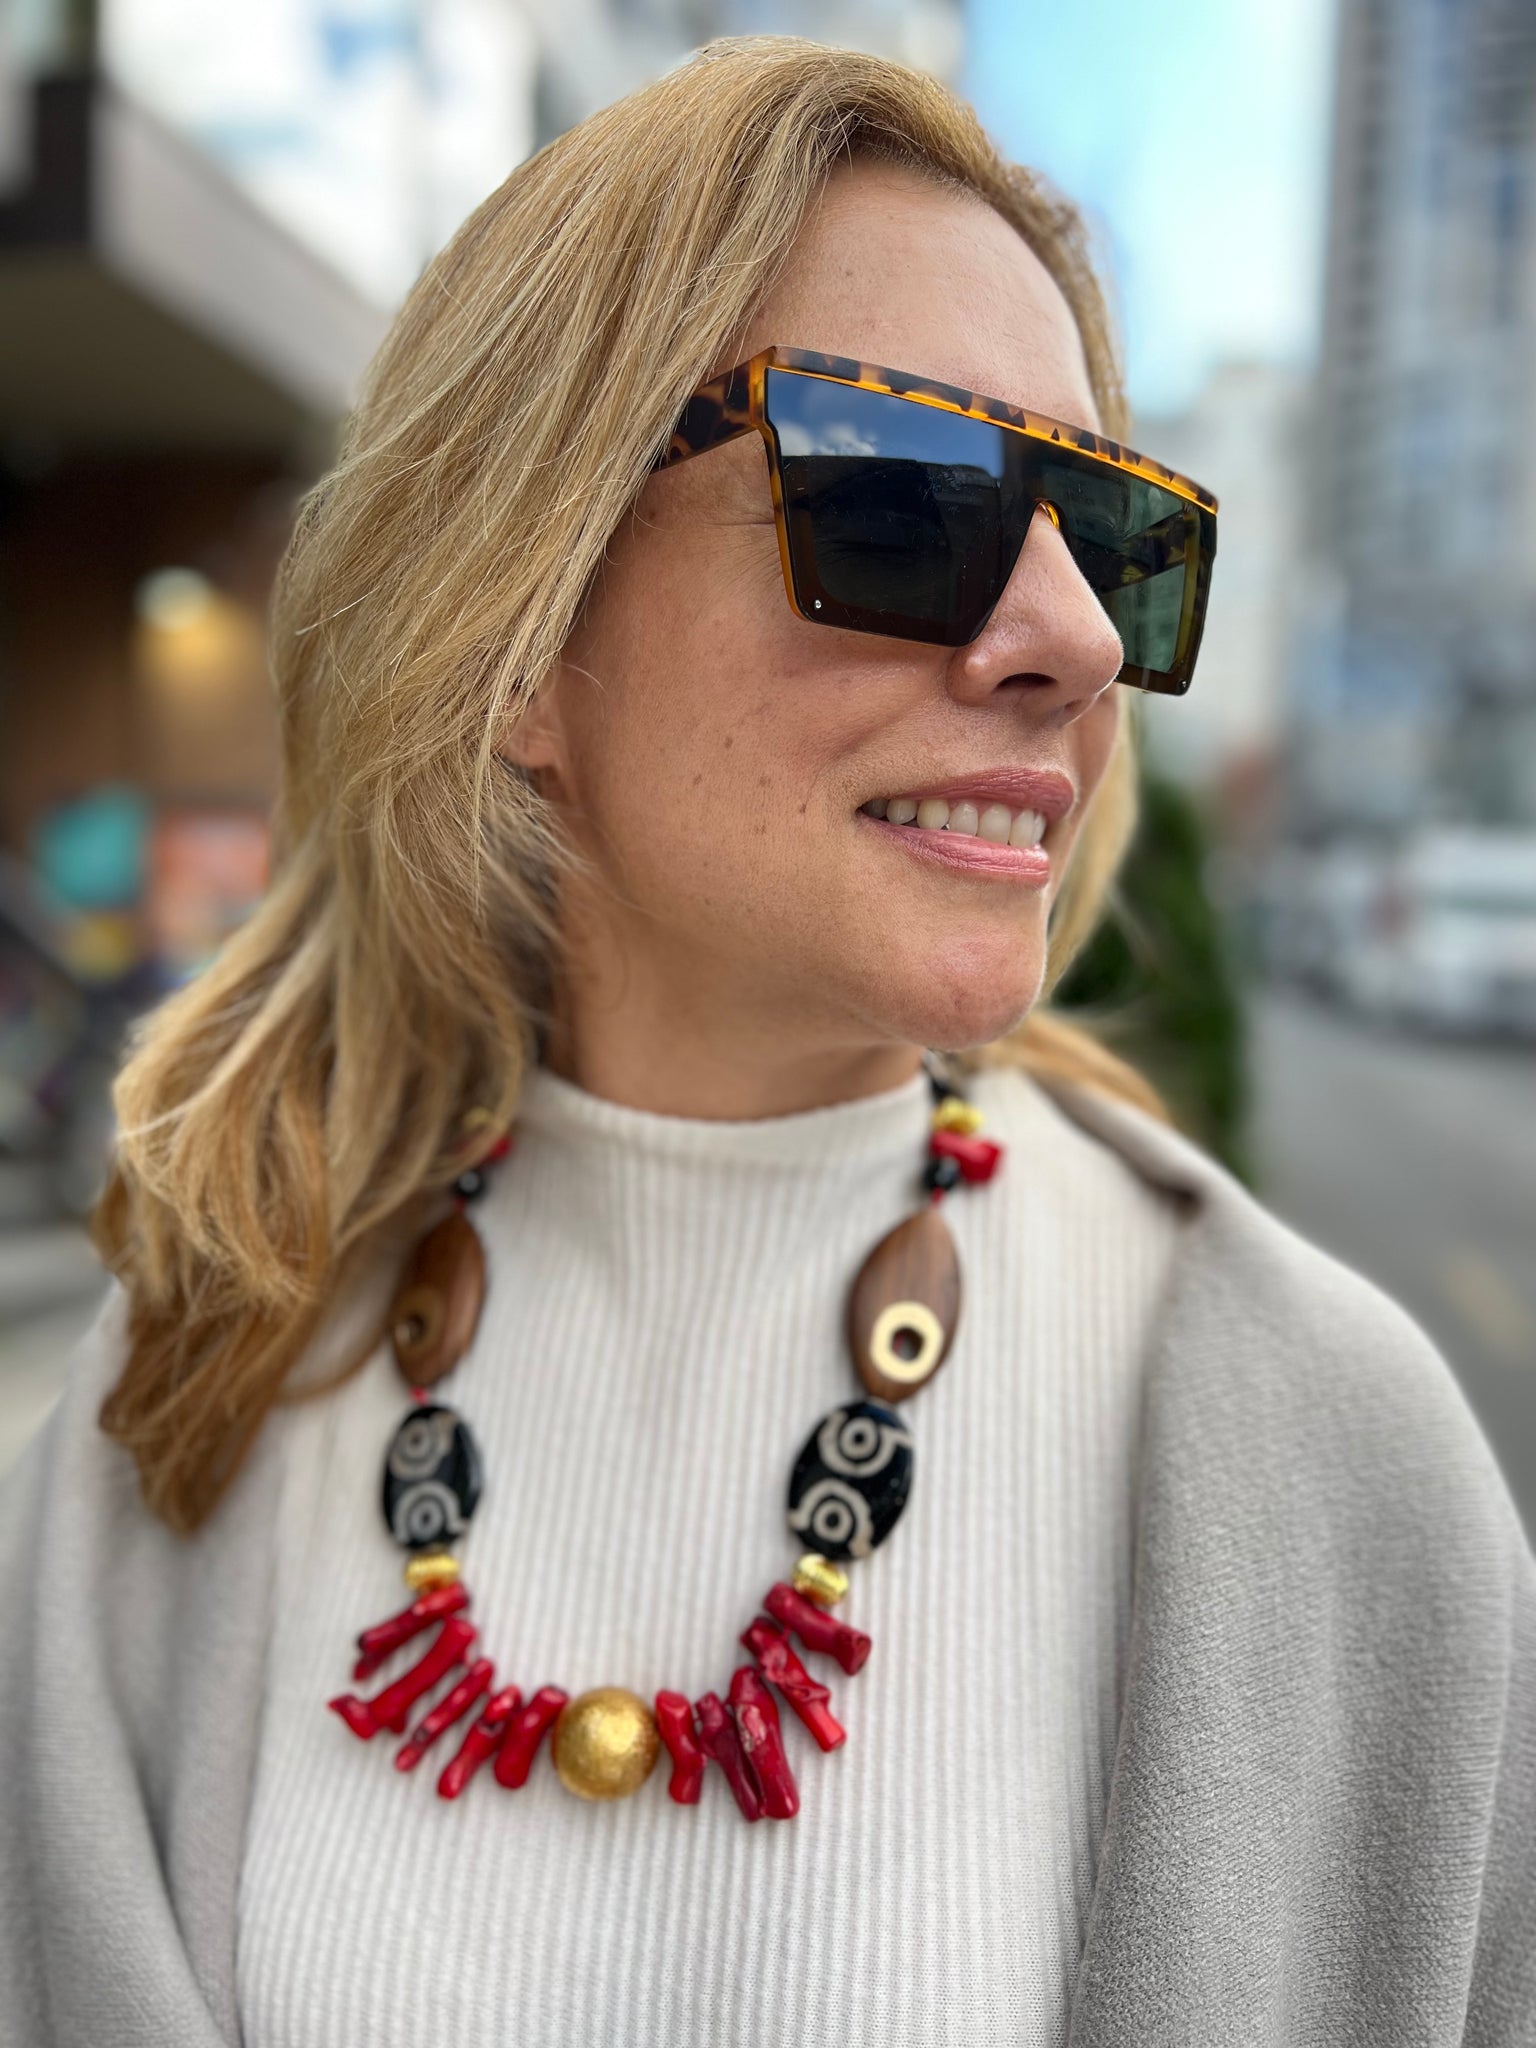 Statement necklace in coral wood and Tibetan agate on blond woman and white shirt inamullumani touch wood 